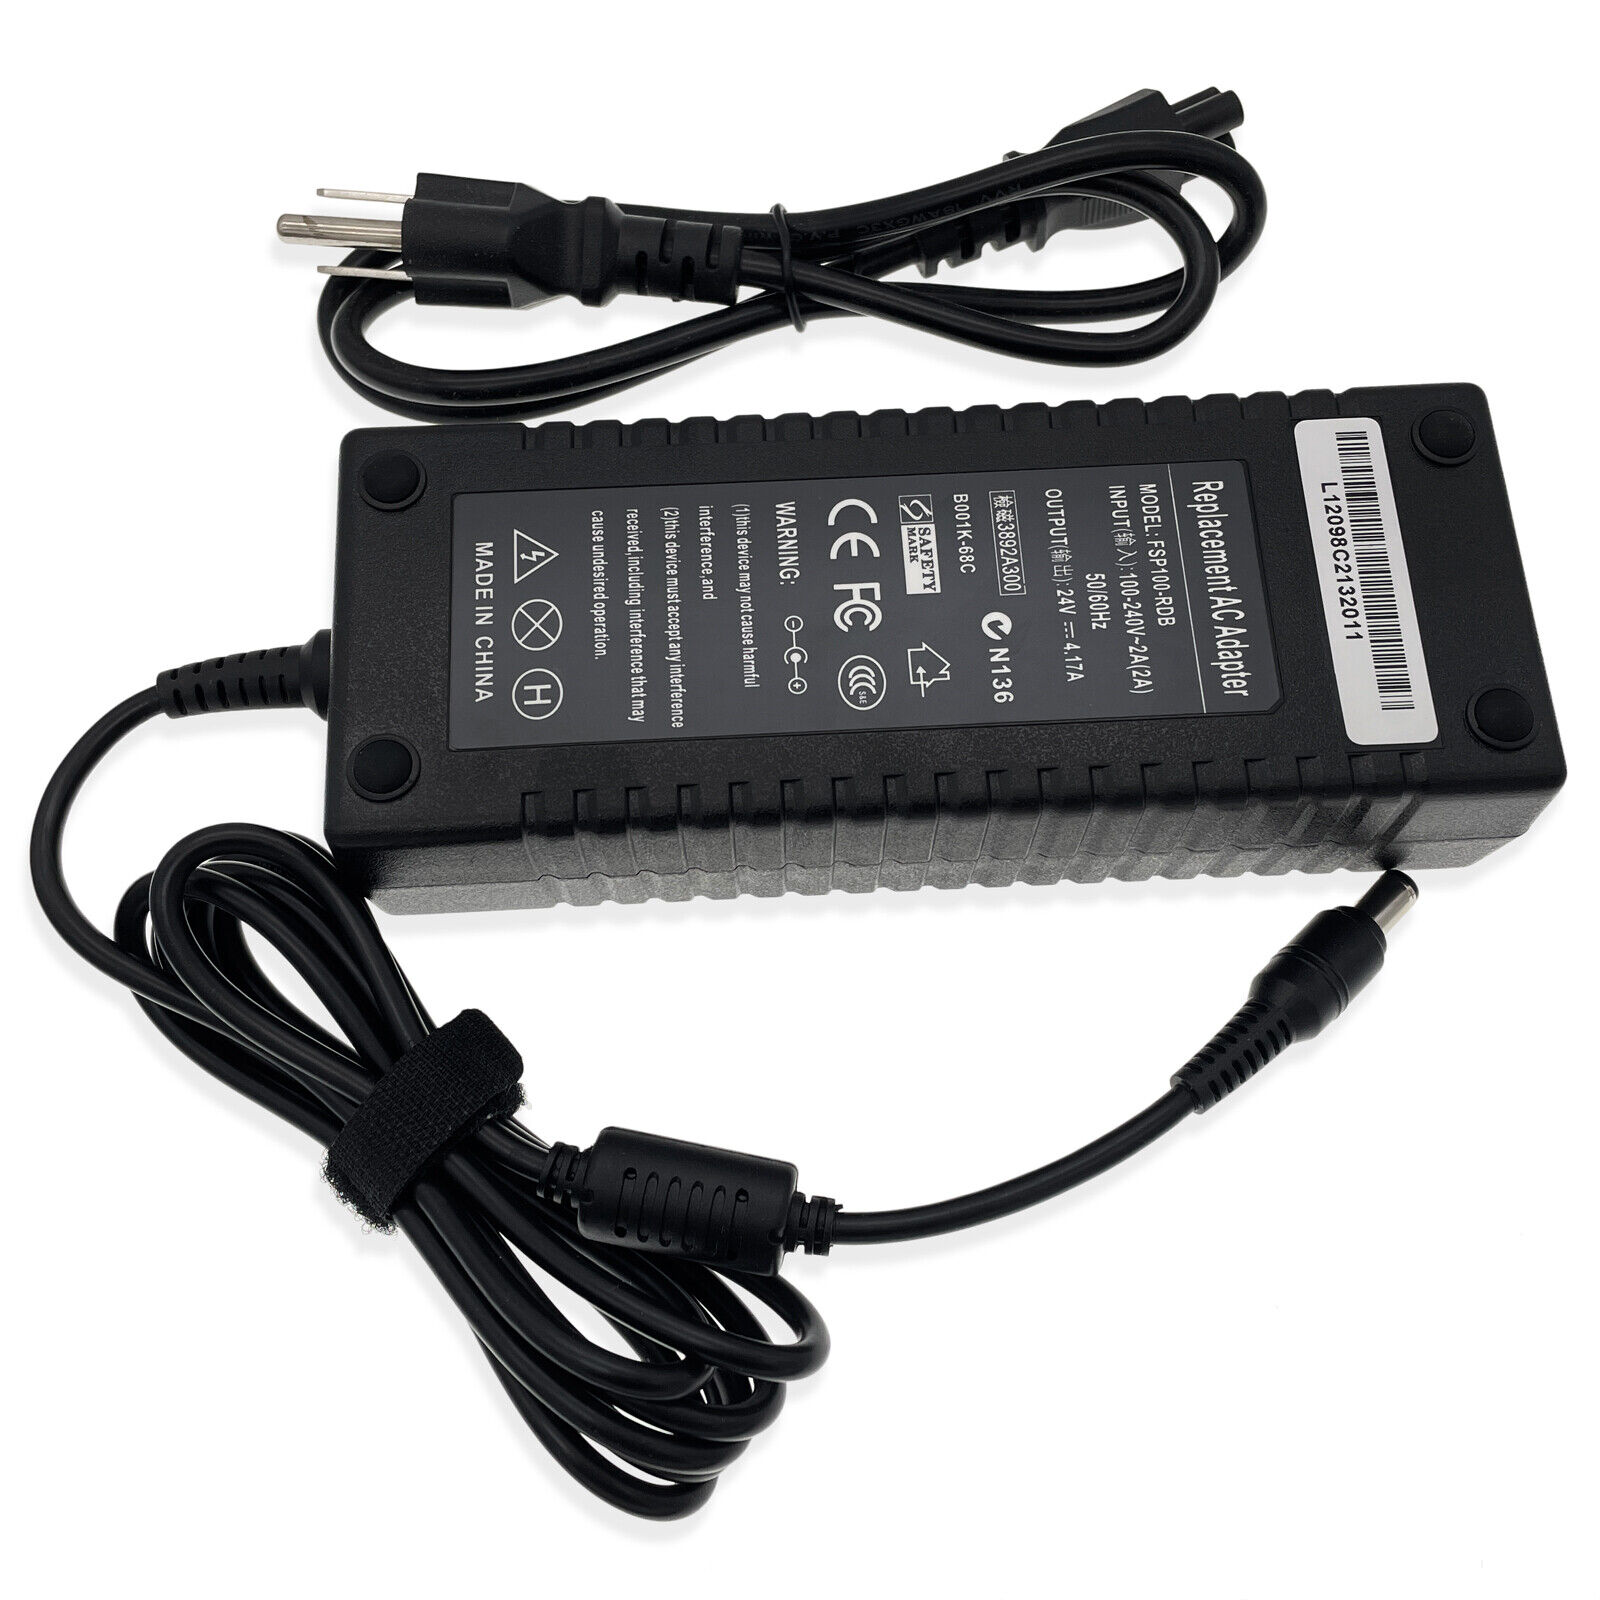 New AC Power Adapter Charger For Zebra GX420D GX420T GX430T Printer FSP100-RDB Brand Unbranded Color Black Compatible